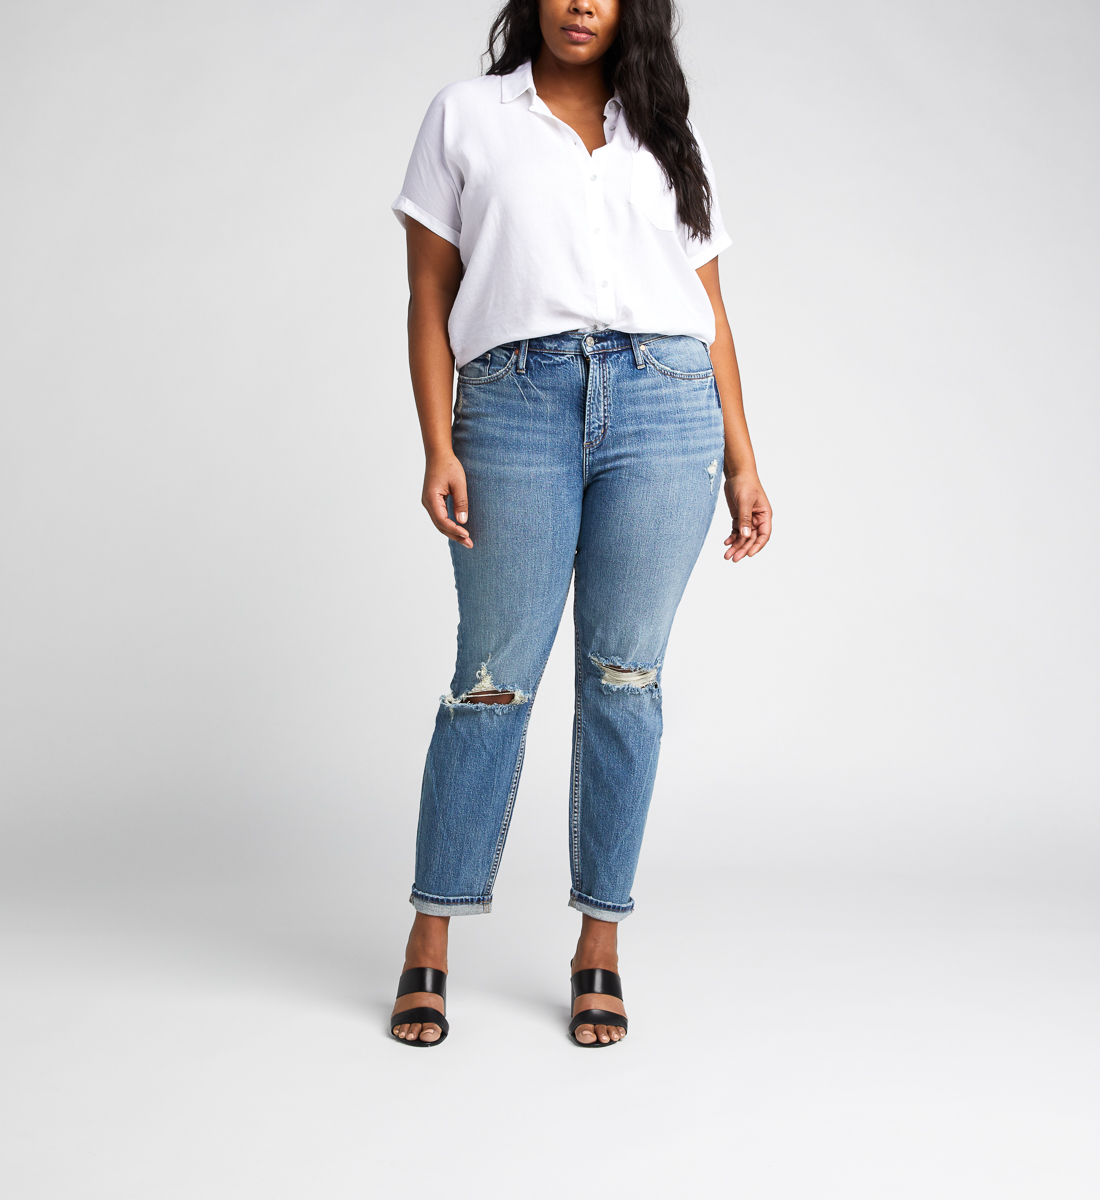 Frisco High Rise Tapered Leg Jeans Plus Size - Silver Jeans US